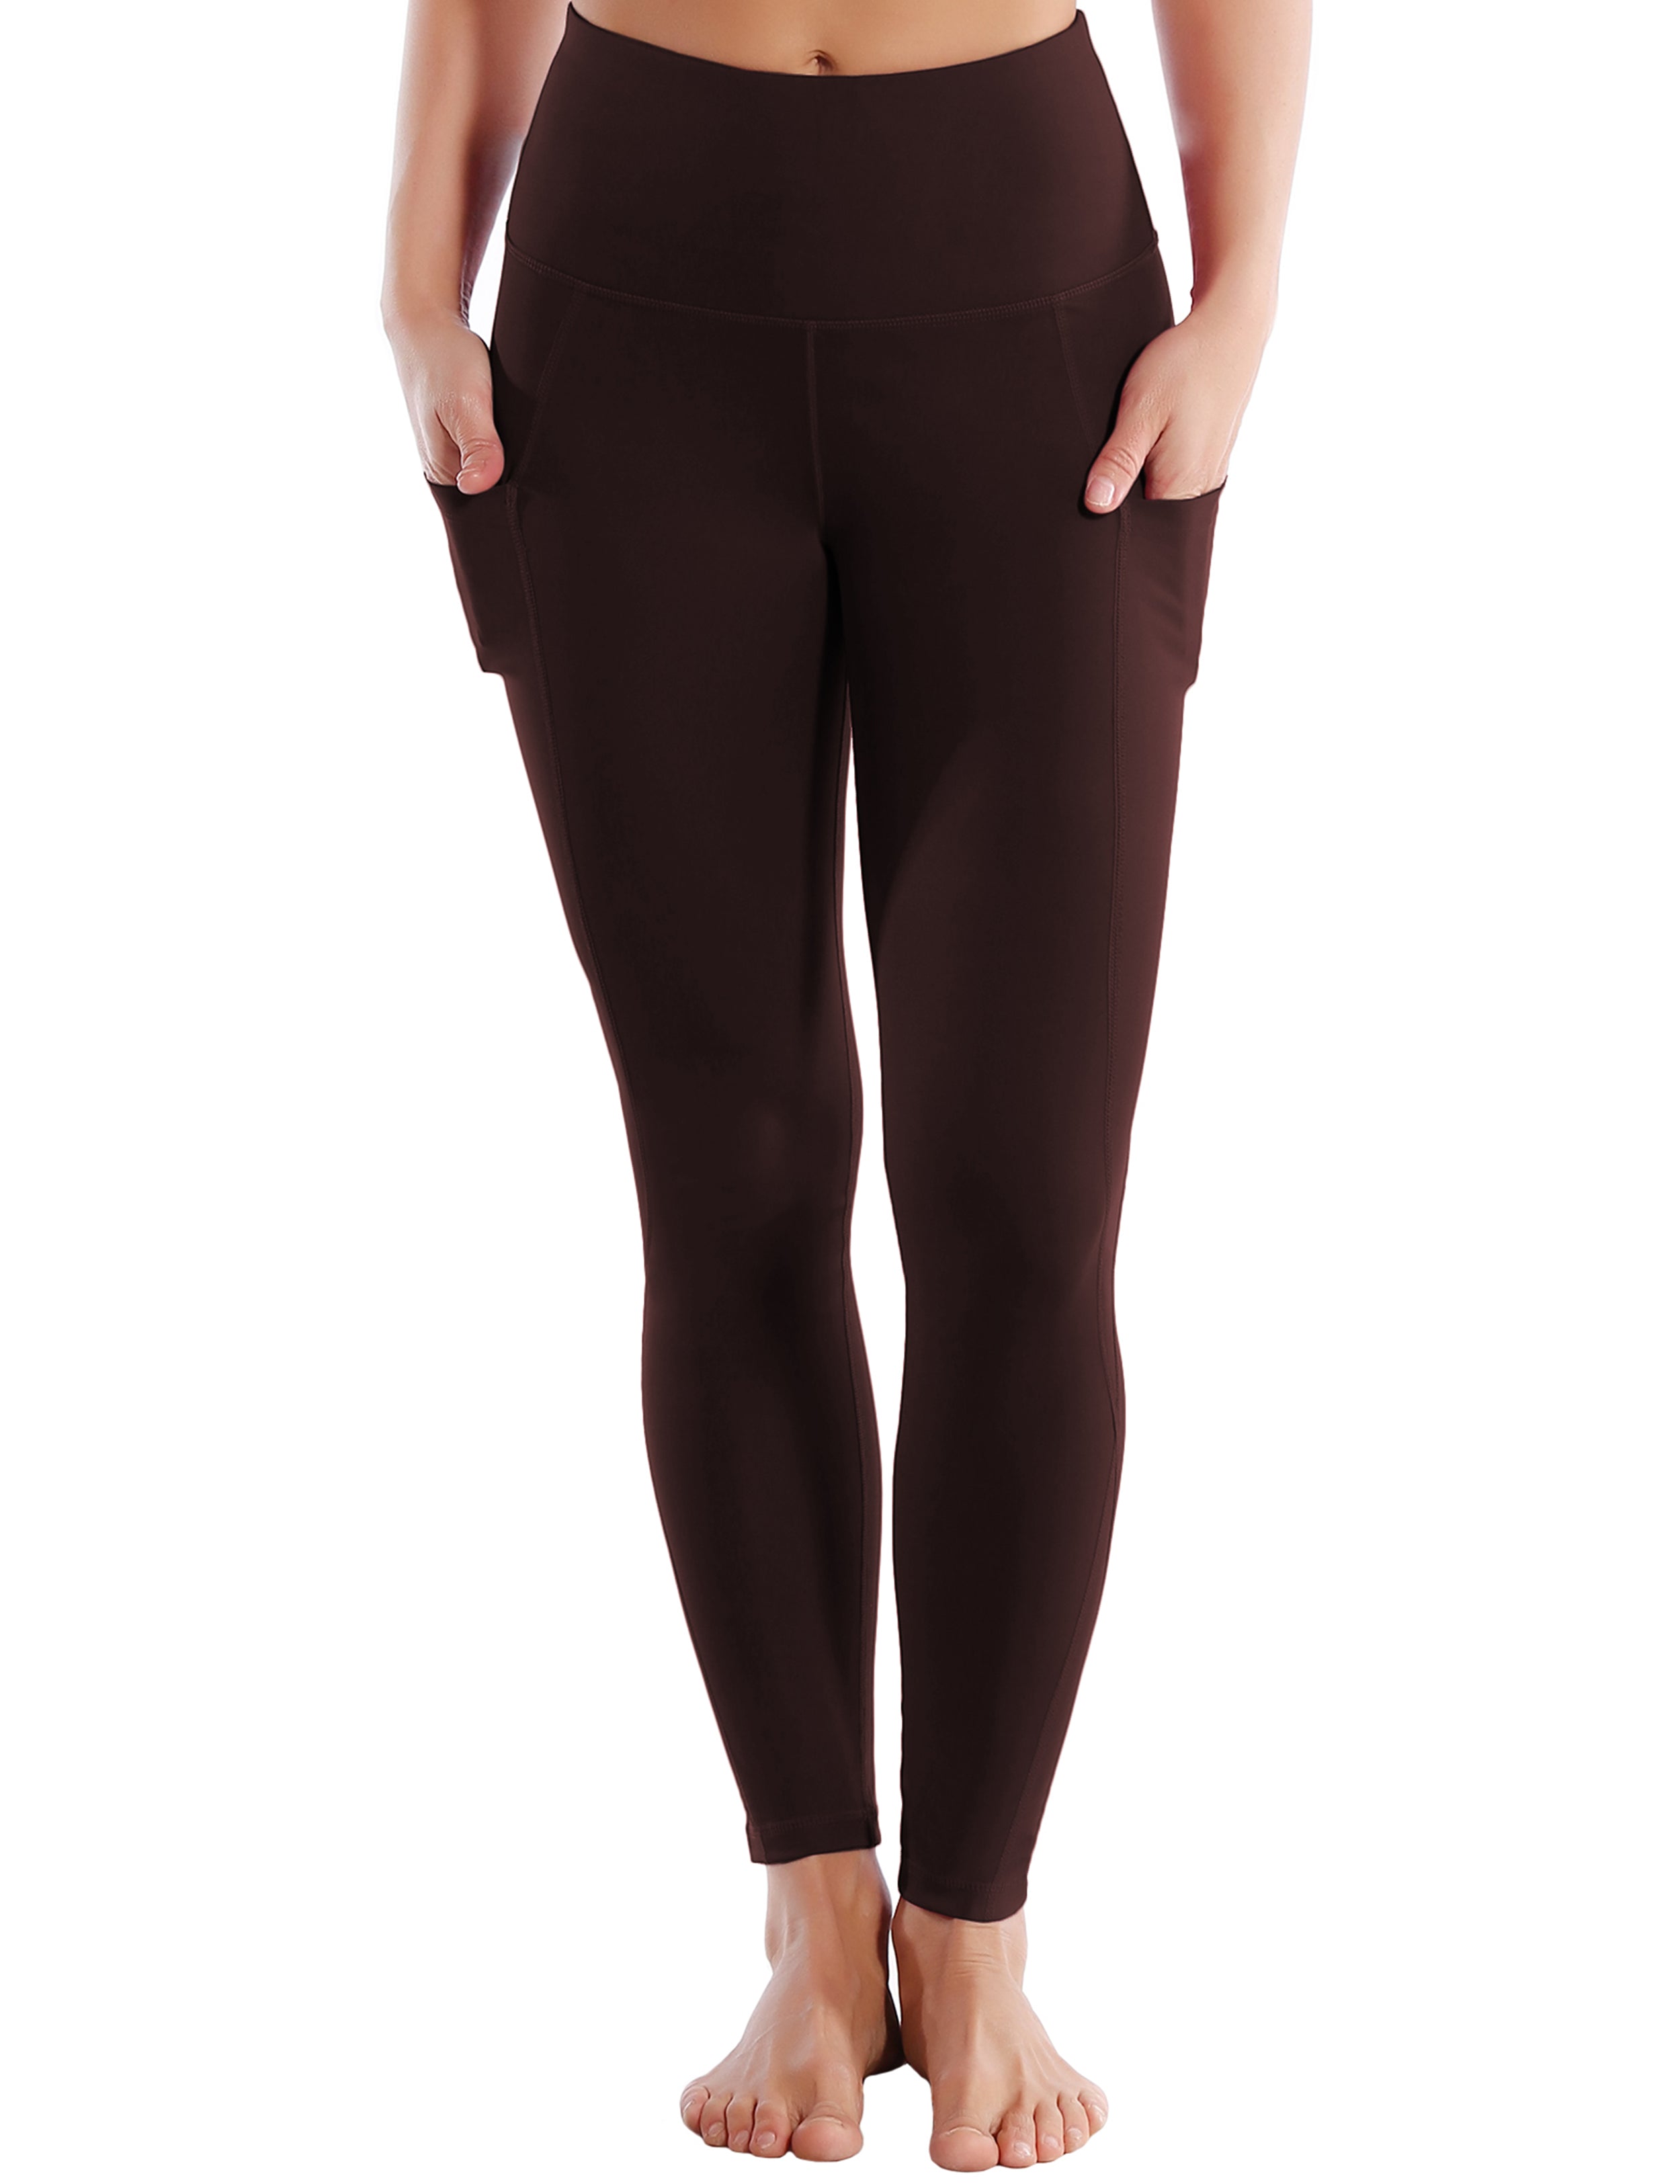 High Waist Side Pockets Tall Size Pants mahoganymaroon 75% Nylon, 25% Spandex Fabric doesn't attract lint easily 4-way stretch No see-through Moisture-wicking Tummy control Inner pocket